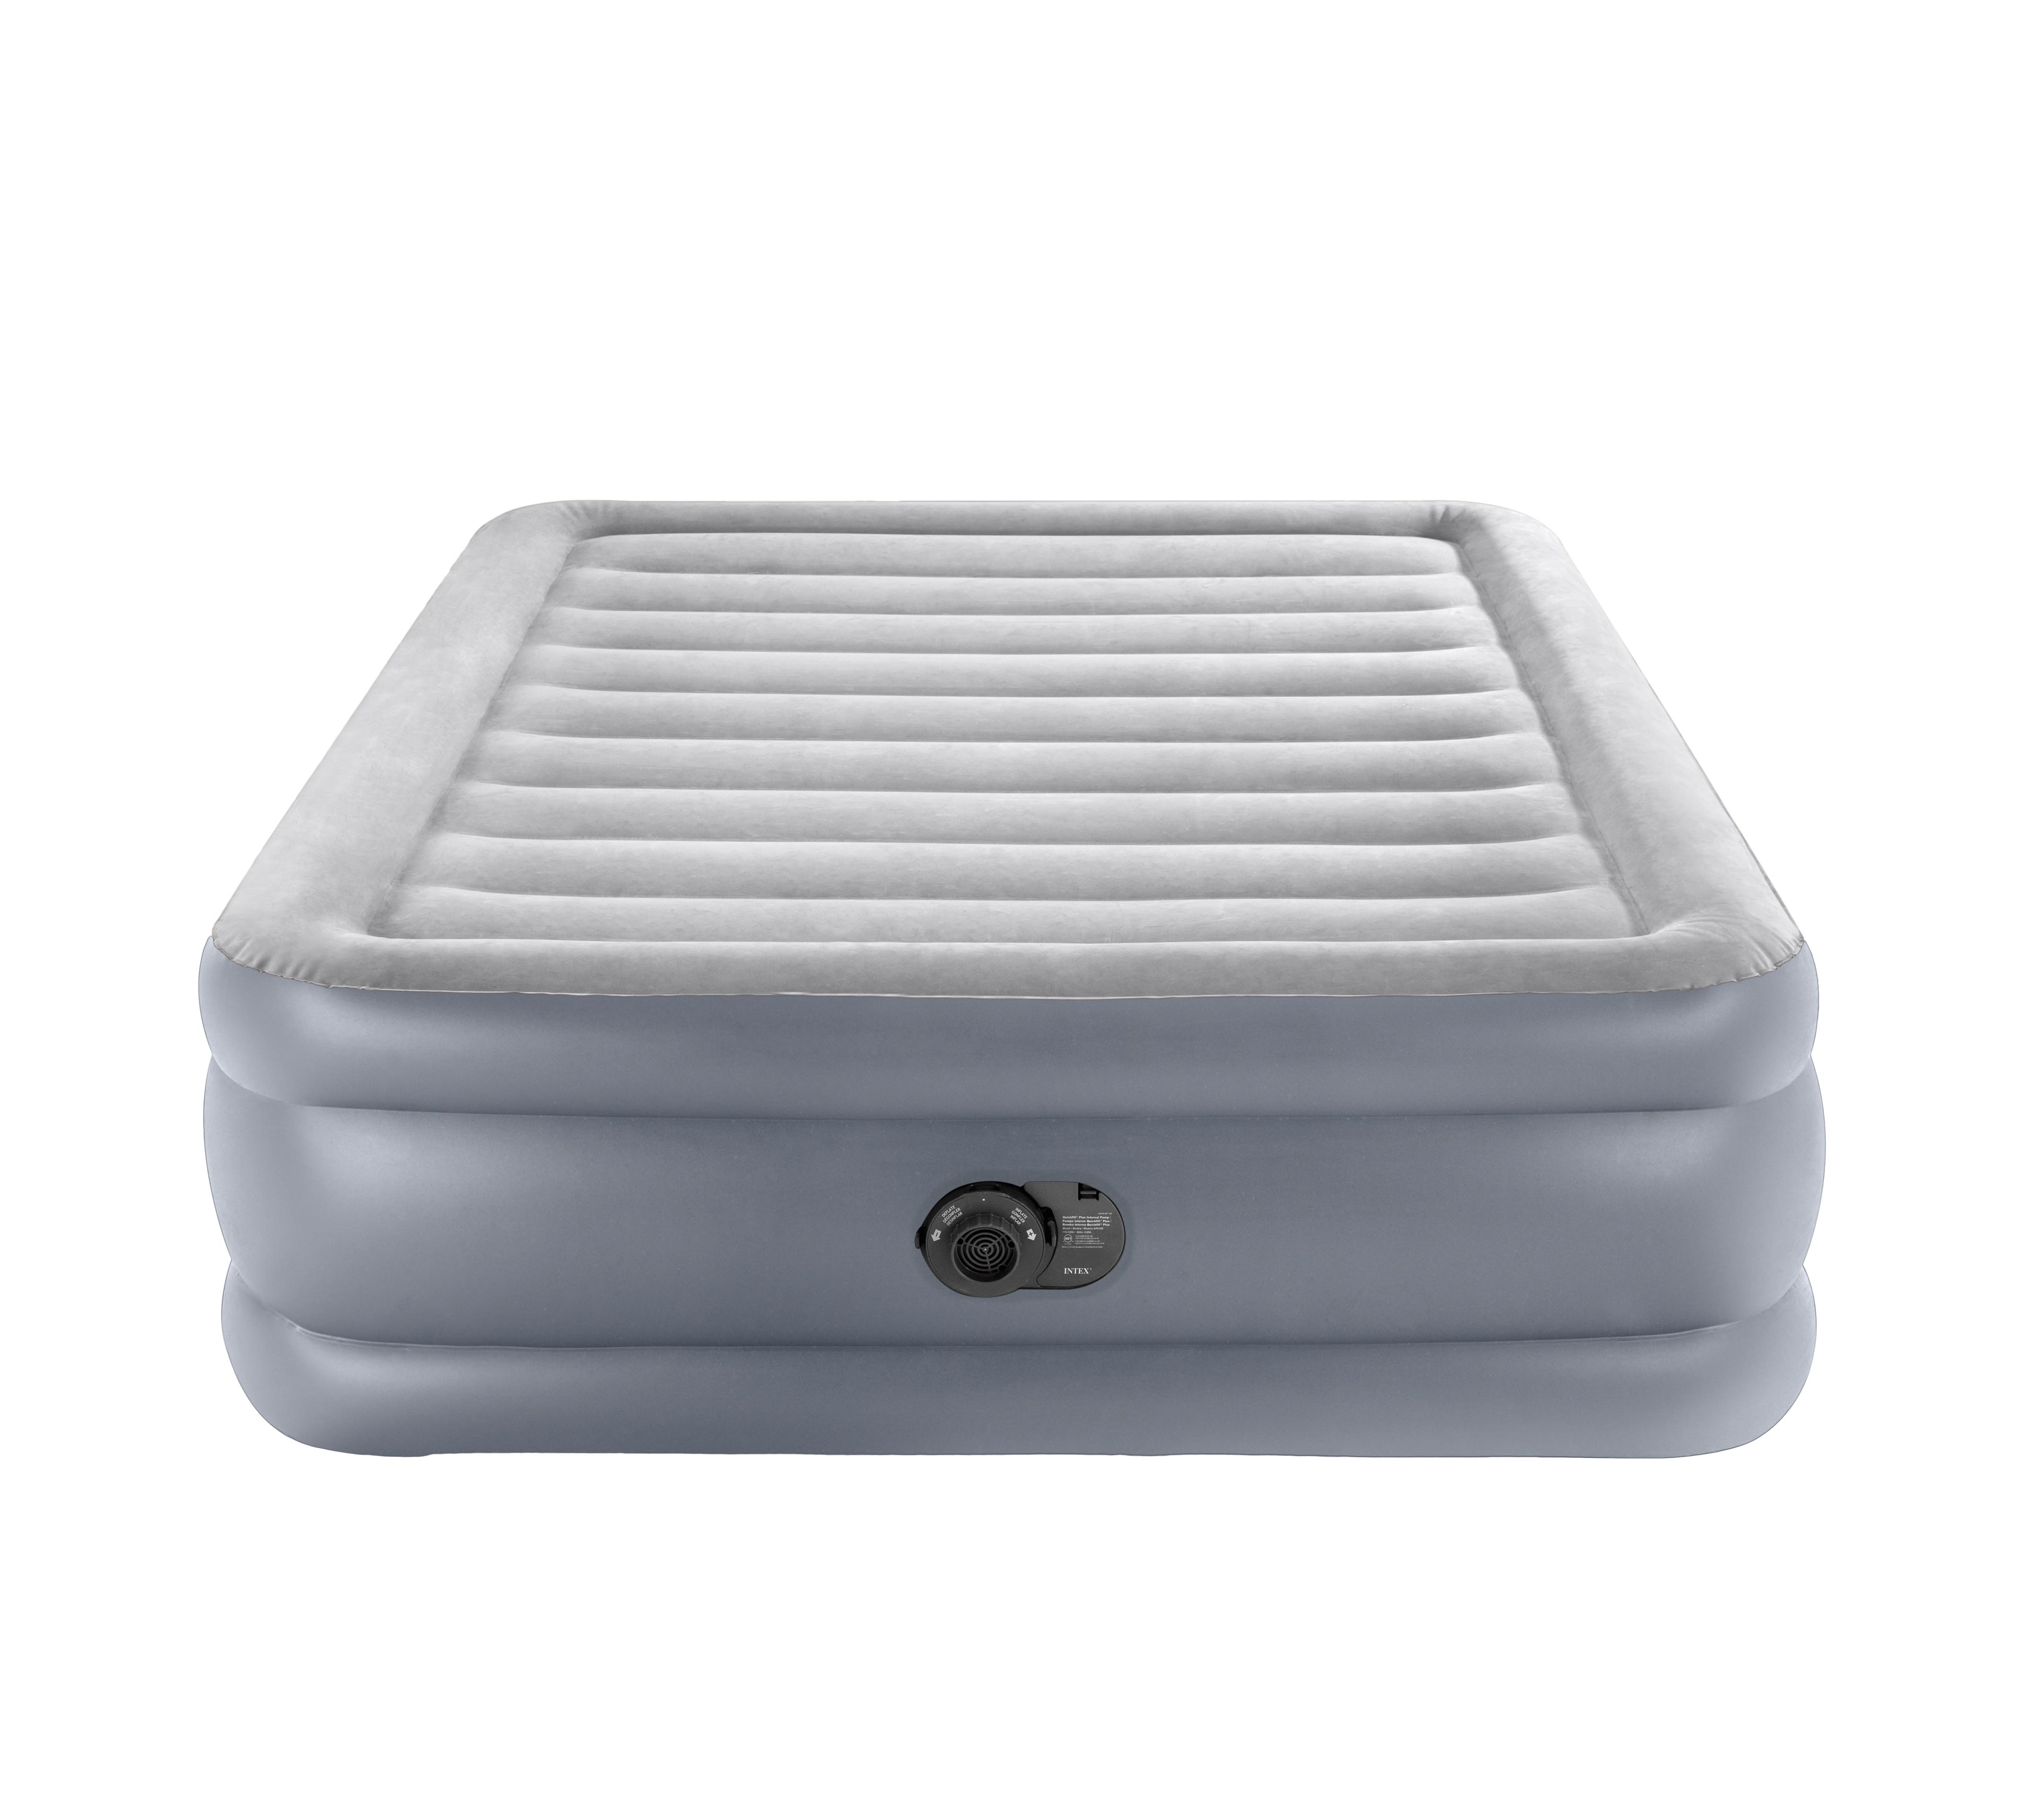 Intex 20" Dura-Beam Deluxe Raised Air Bed Mattress with Internal Pump - Queen - image 3 of 14